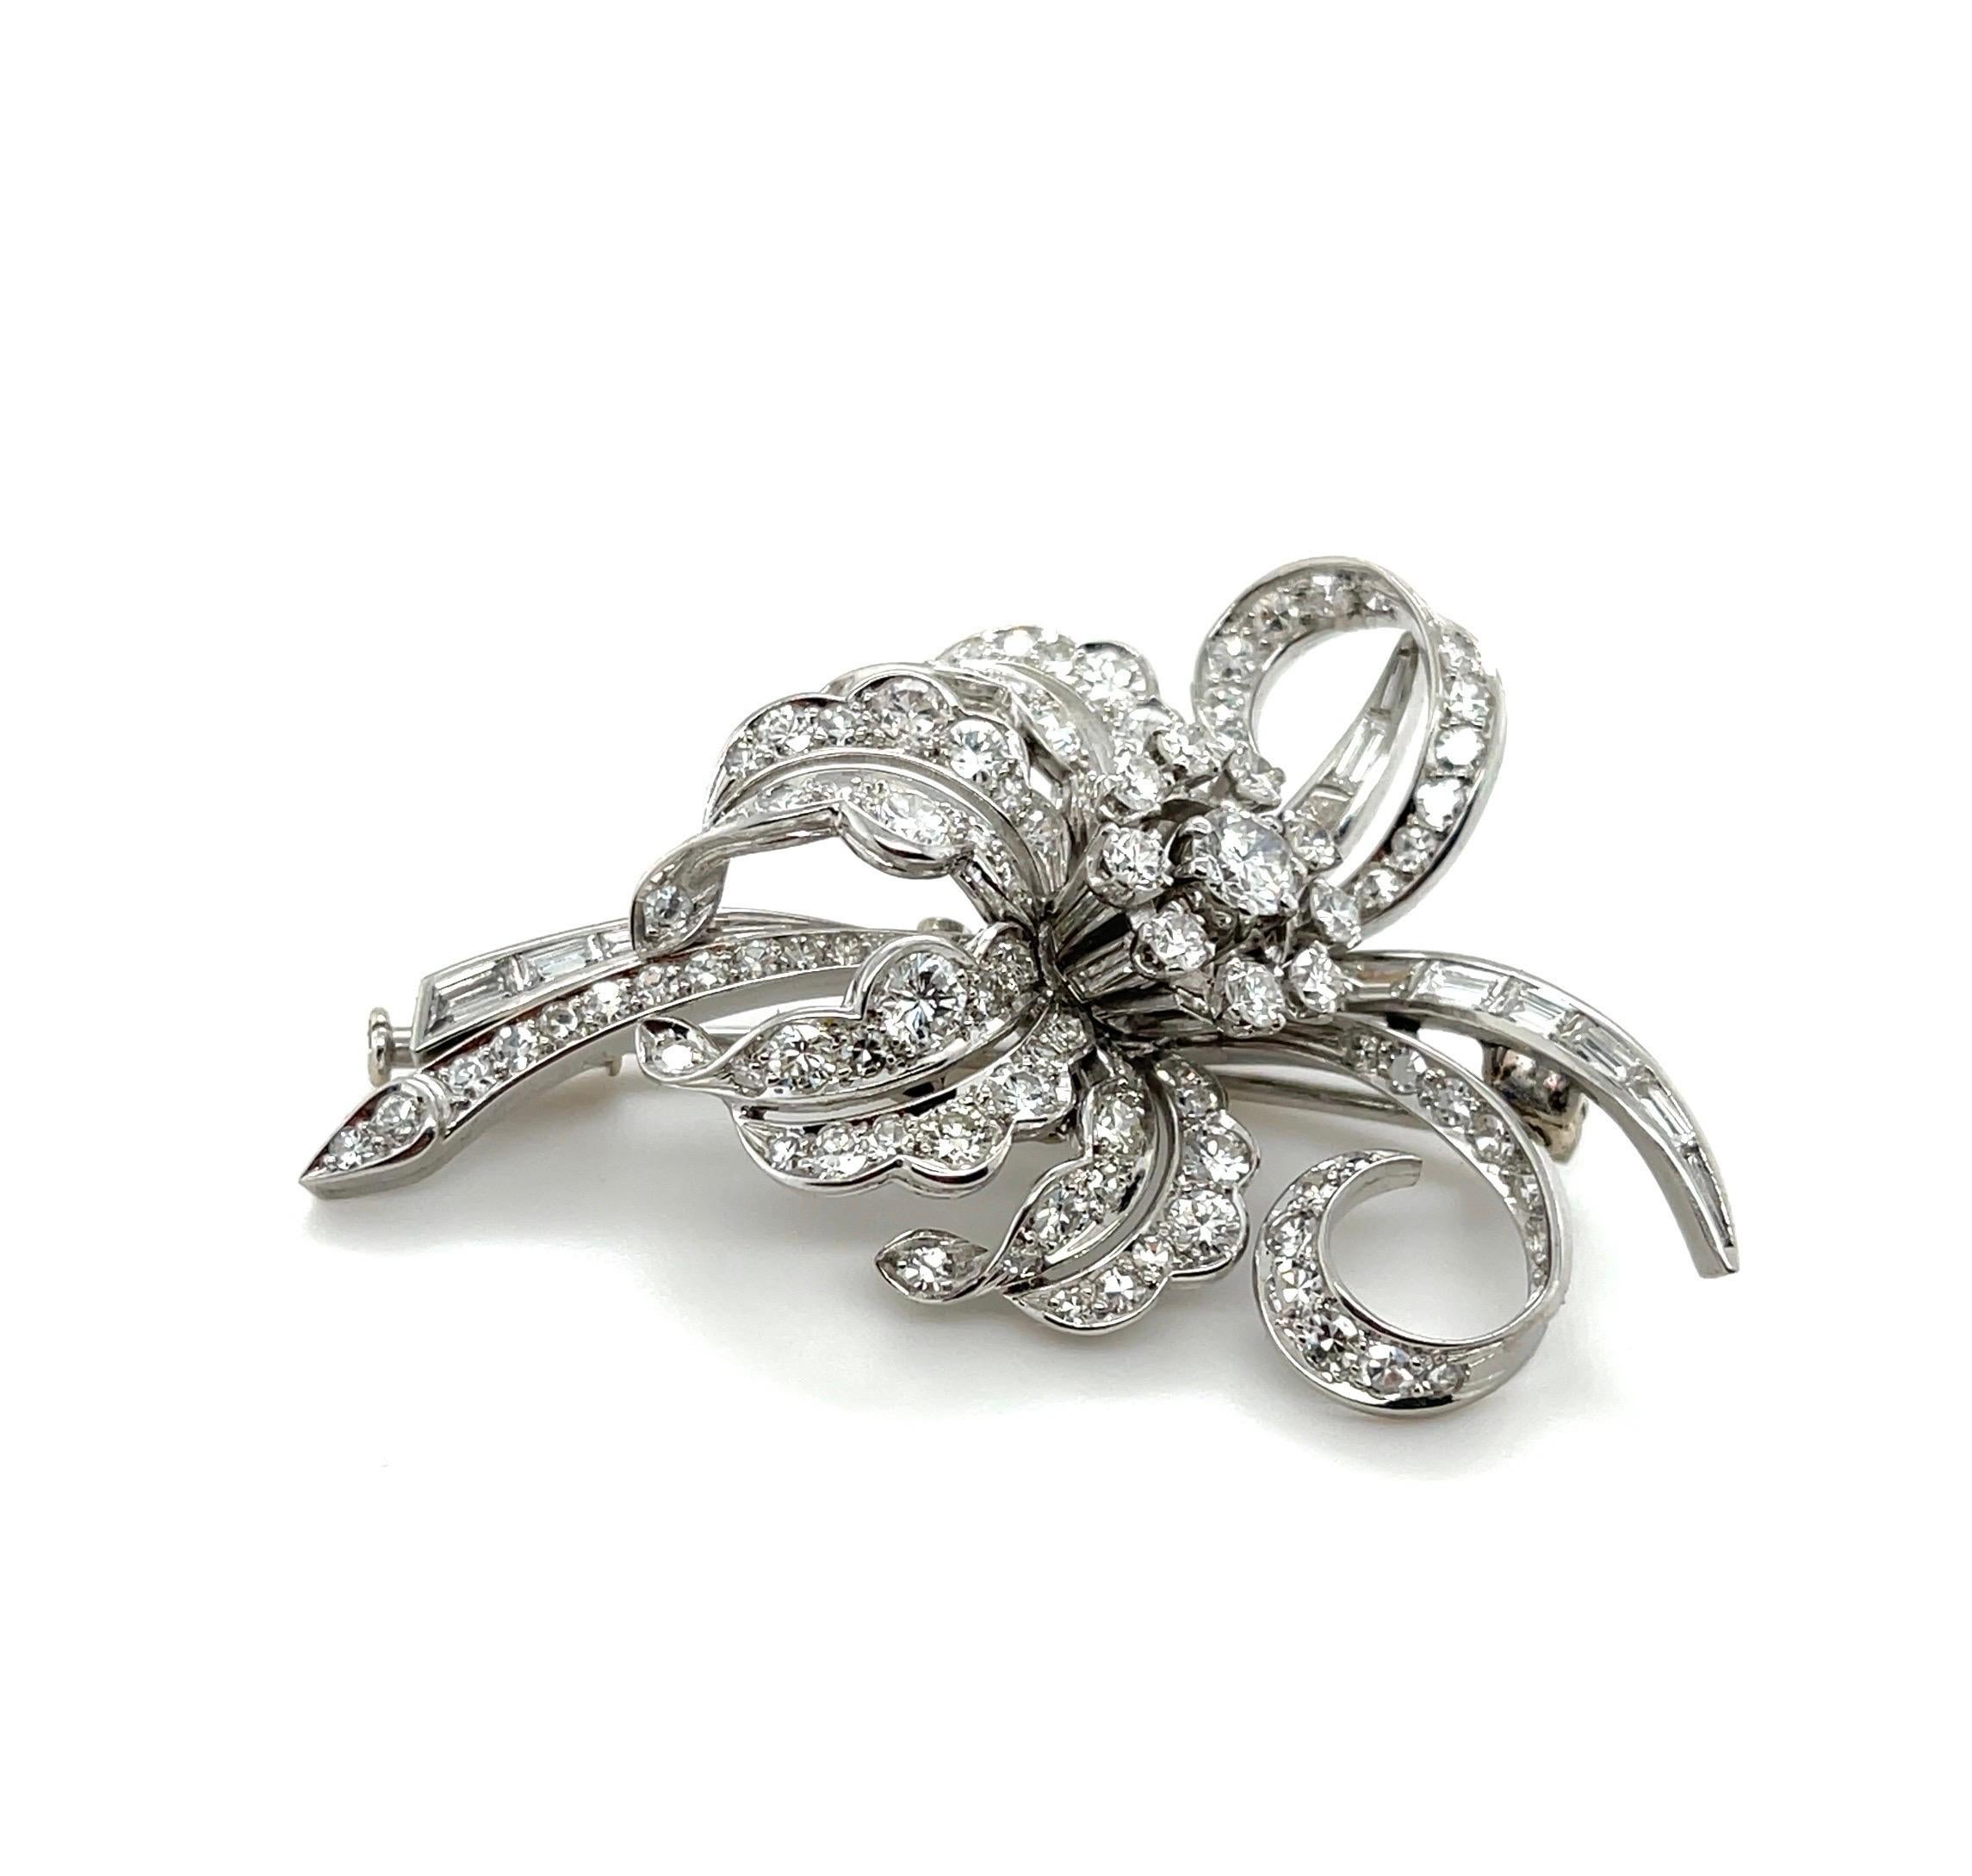 Magnificent French Hand Made Platinum & Diamond Brooch For Sale 6